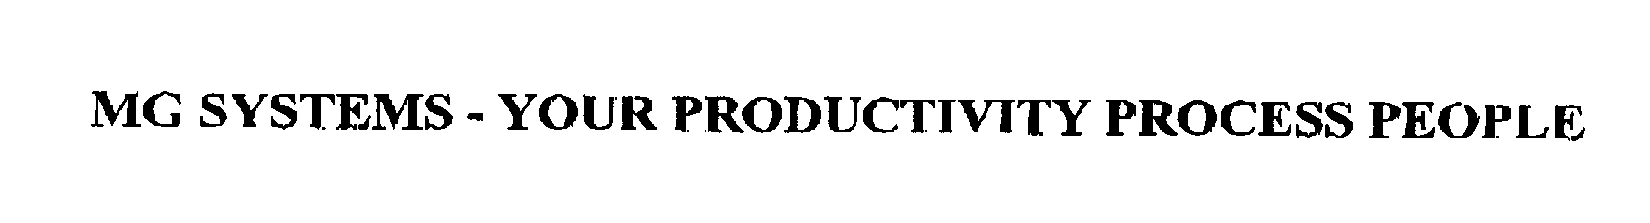  MG SYSTEMS - YOUR PRODUCTIVITY PROCESS PEOPLE